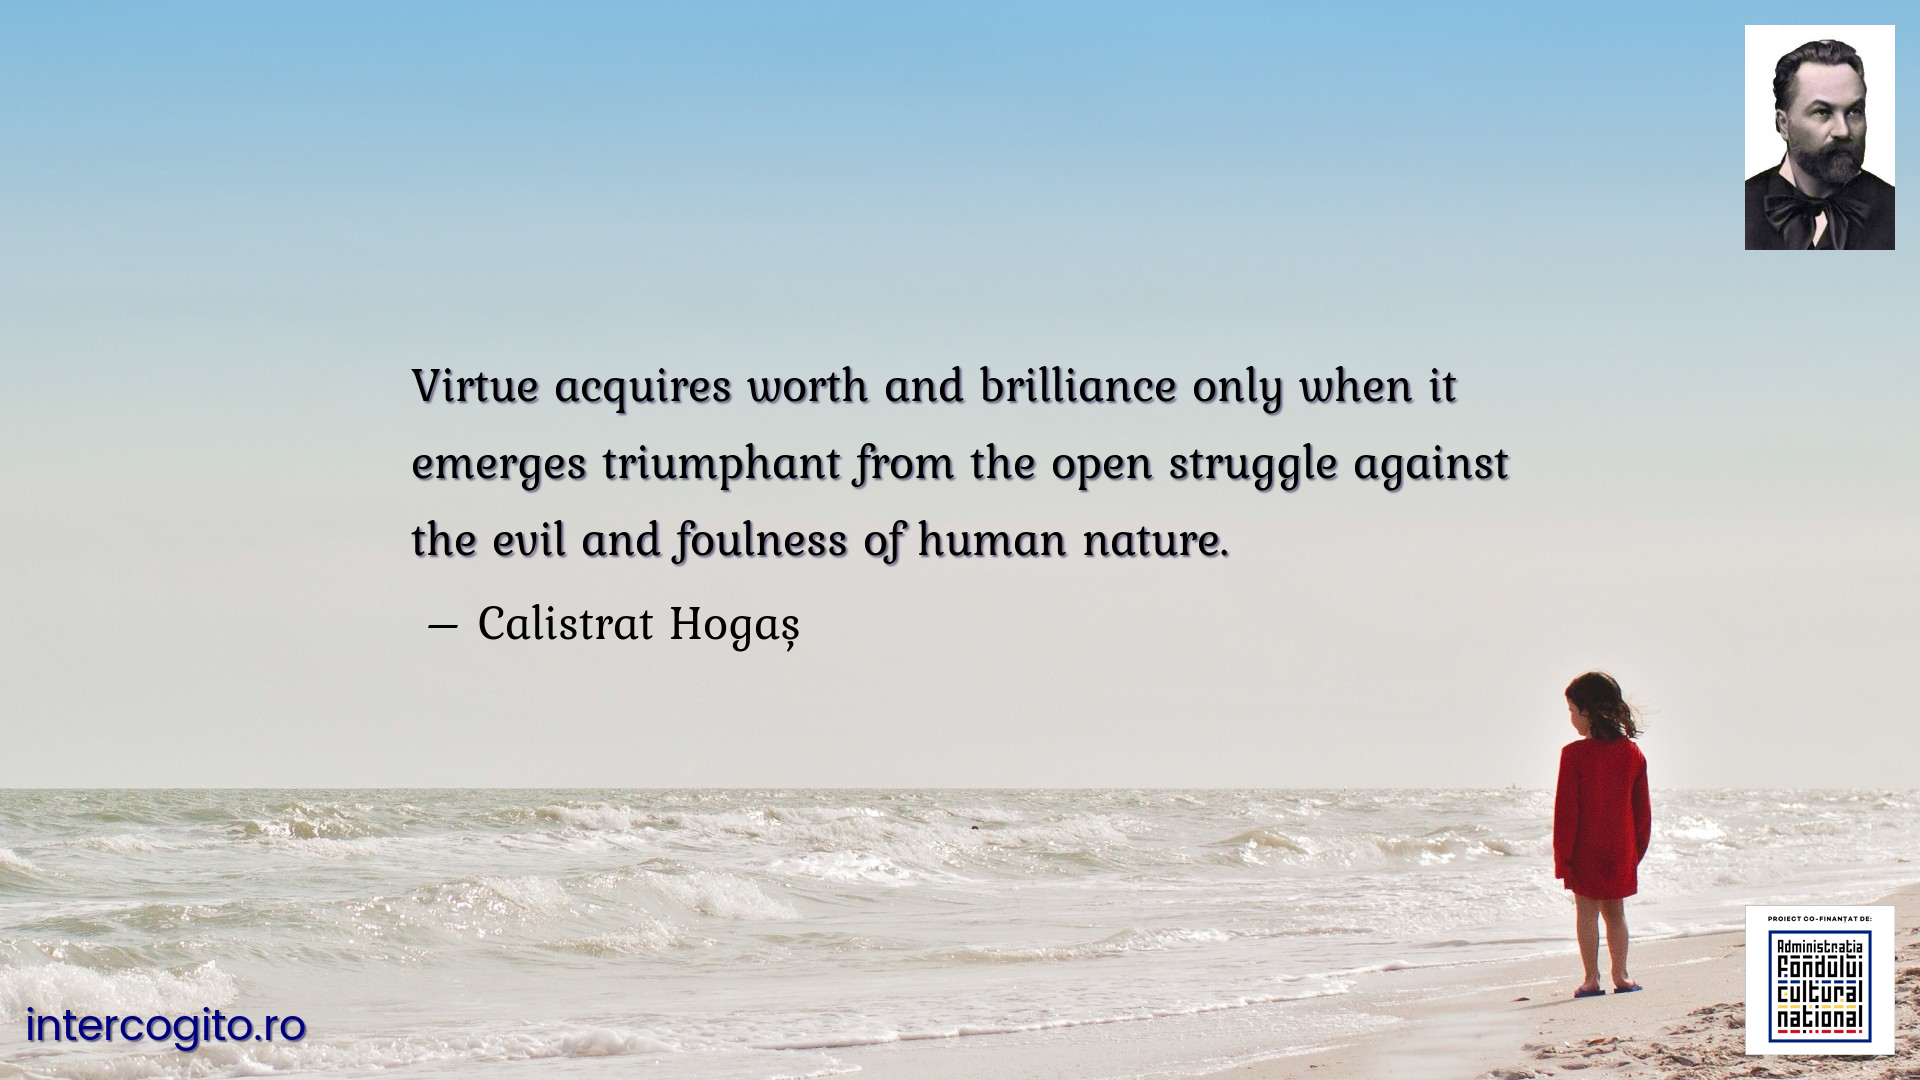 Virtue acquires worth and brilliance only when it emerges triumphant from the open struggle against the evil and foulness of human nature.